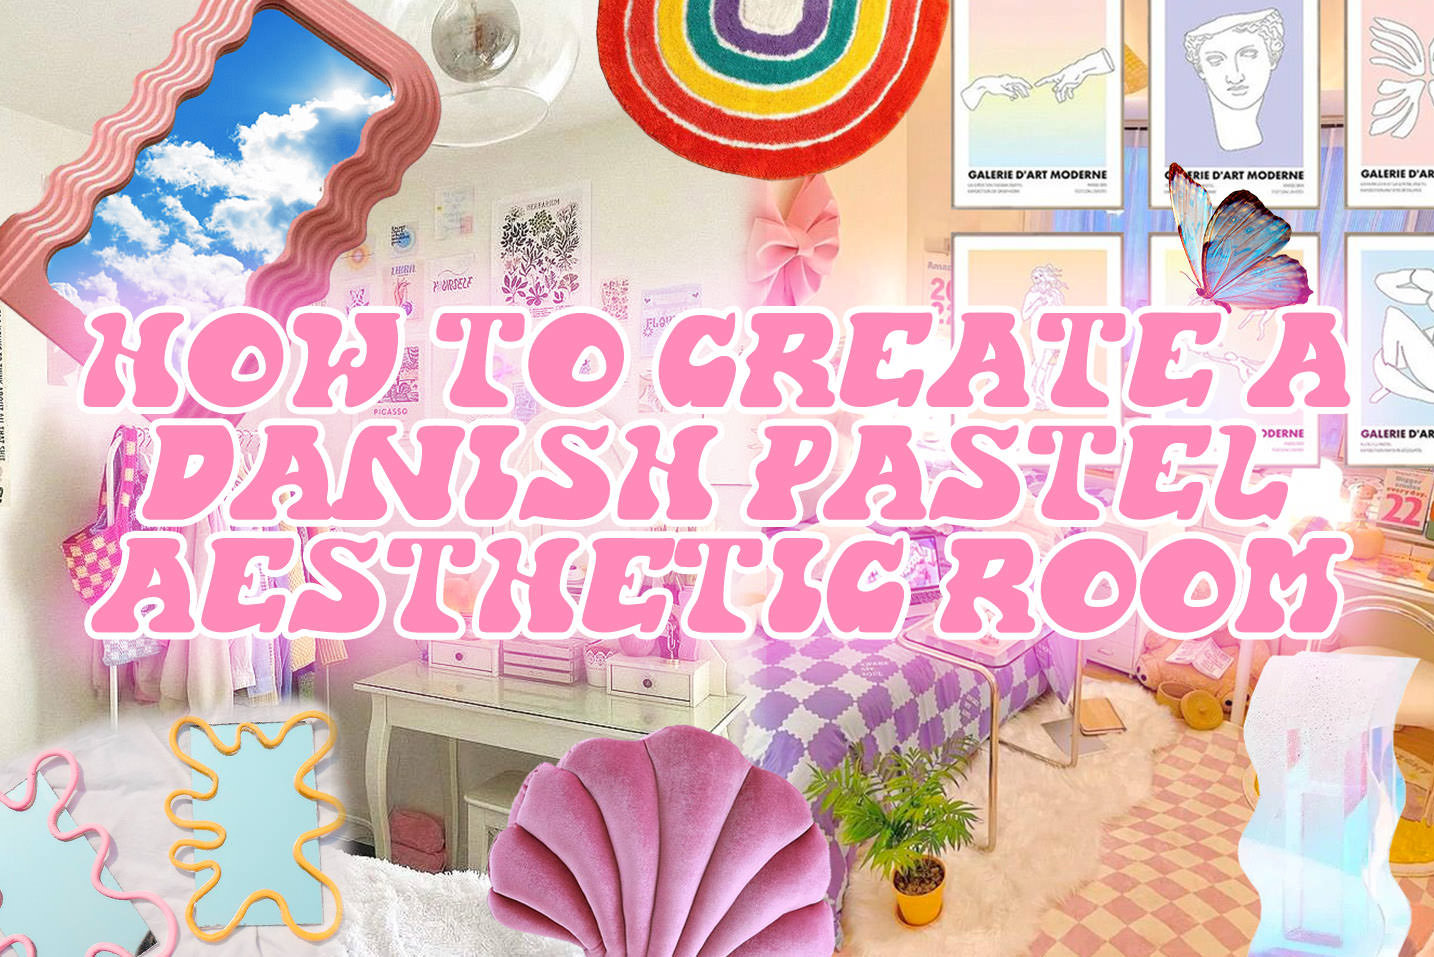 How To Create A Danish Pastel Aesthetic Room? - Boogzel Home